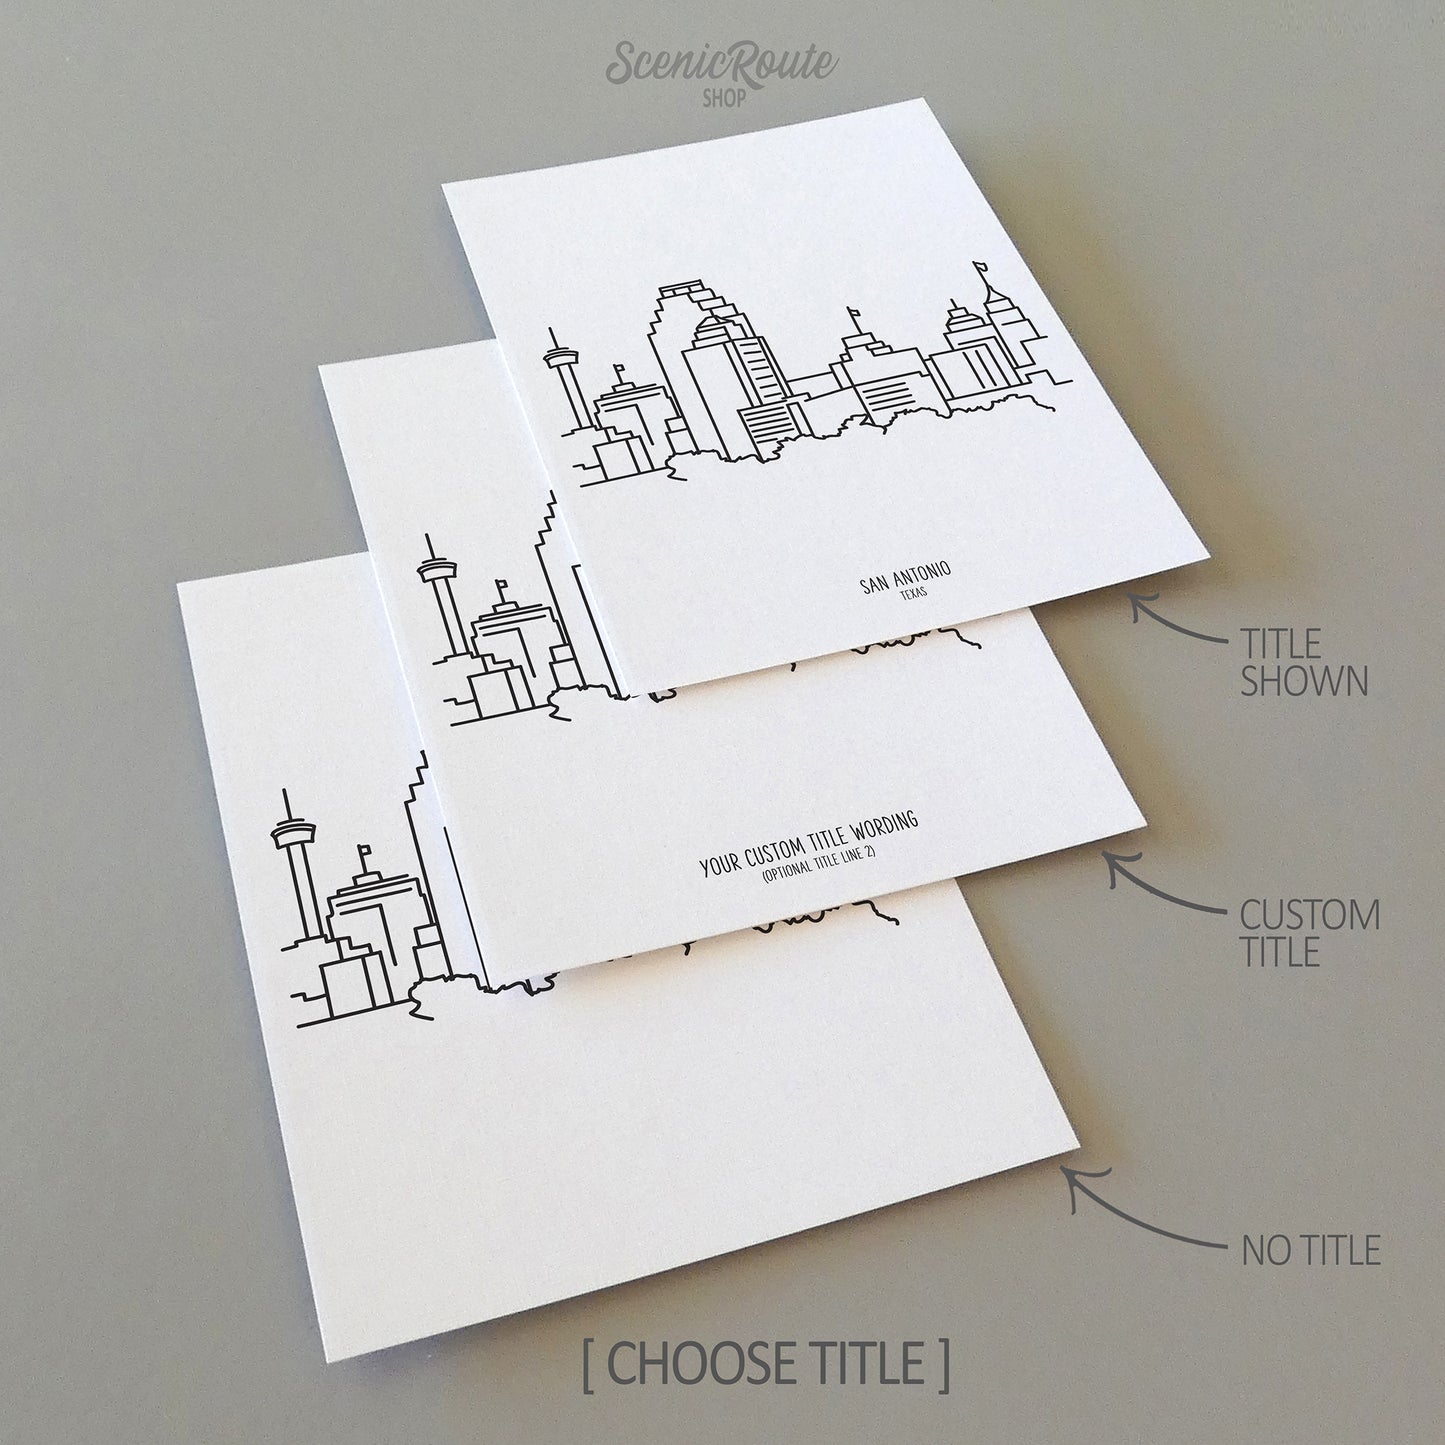 Three line art drawings of the San Antonio Texas Skyline on white linen paper with a gray background. The pieces are shown with title options that can be chosen and personalized.